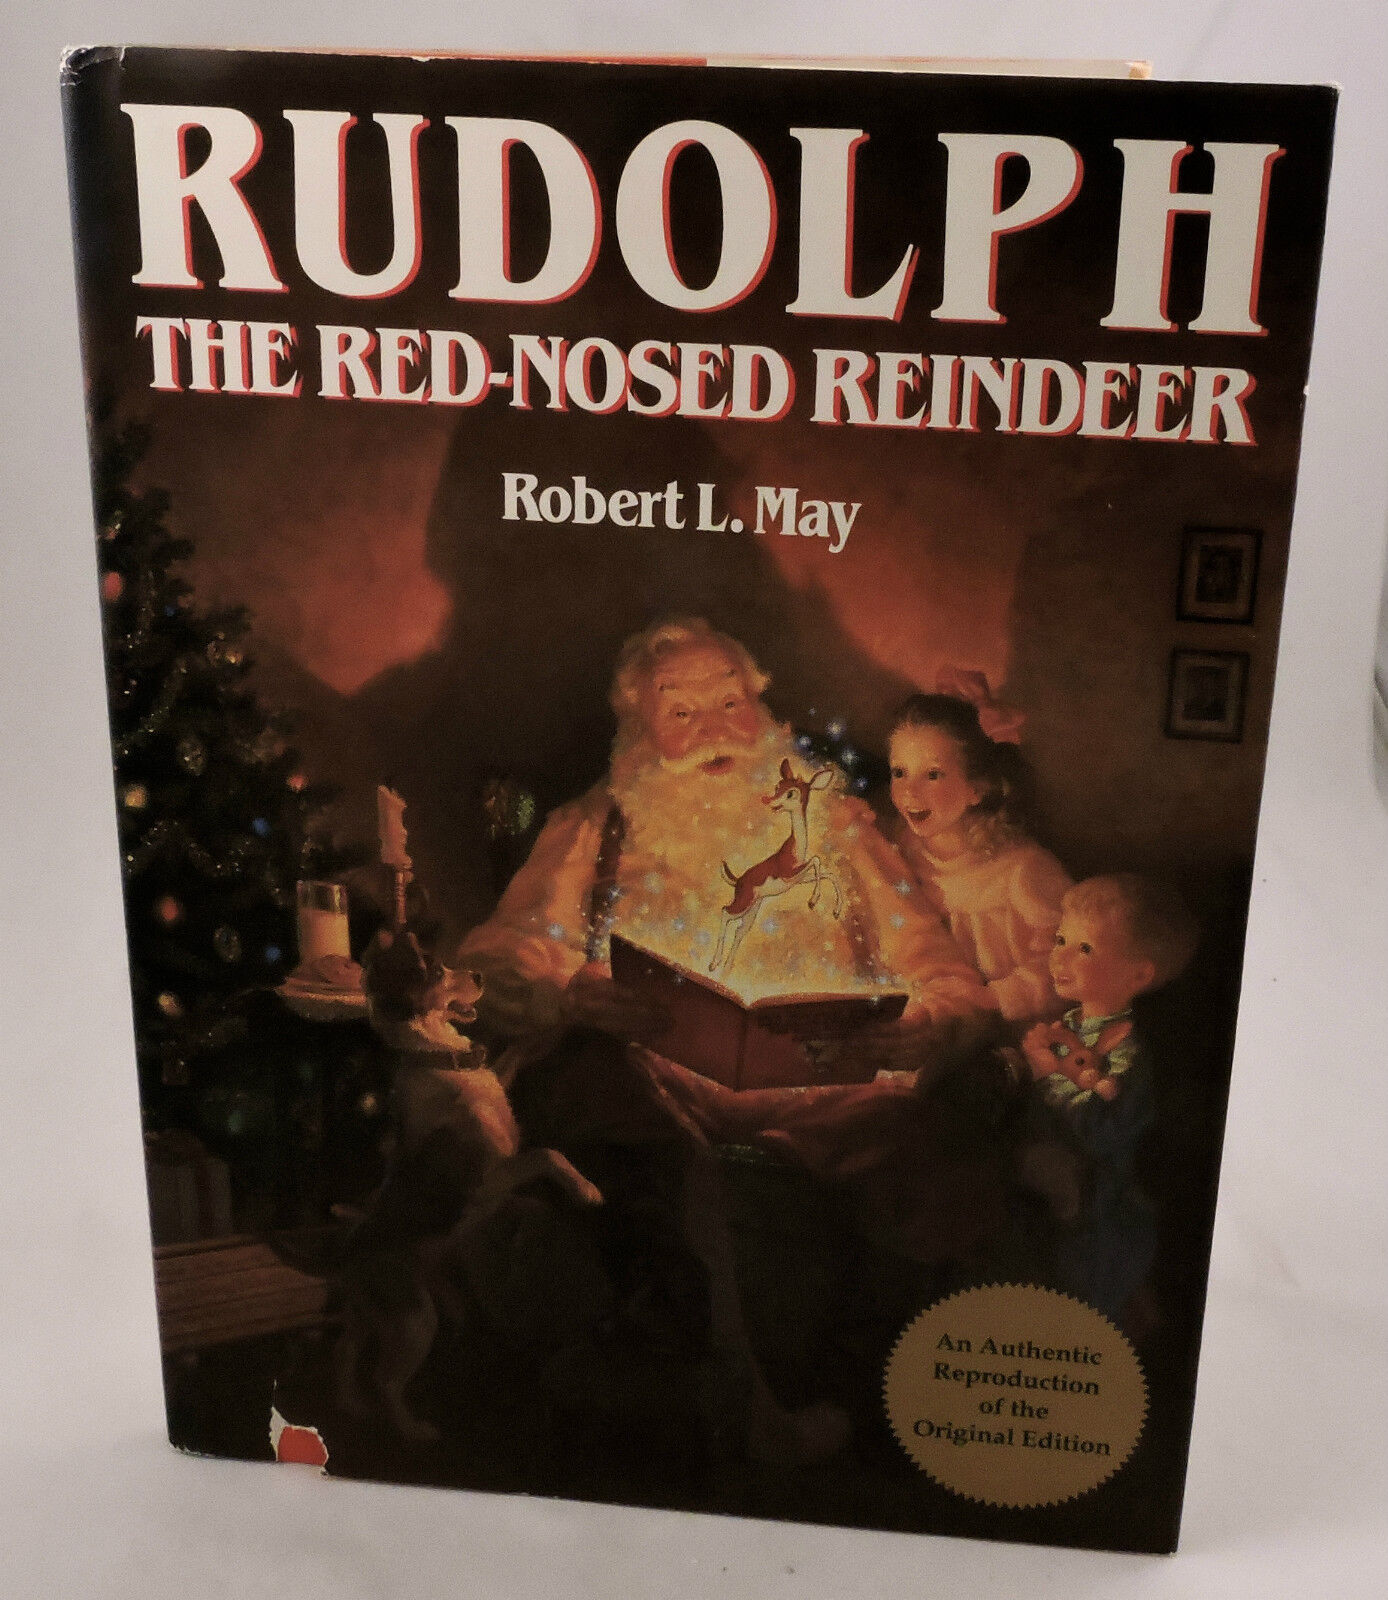 Rudolph the Red Nose Reindeer Robert L. May 1990 Hardcover DJ Holiday book